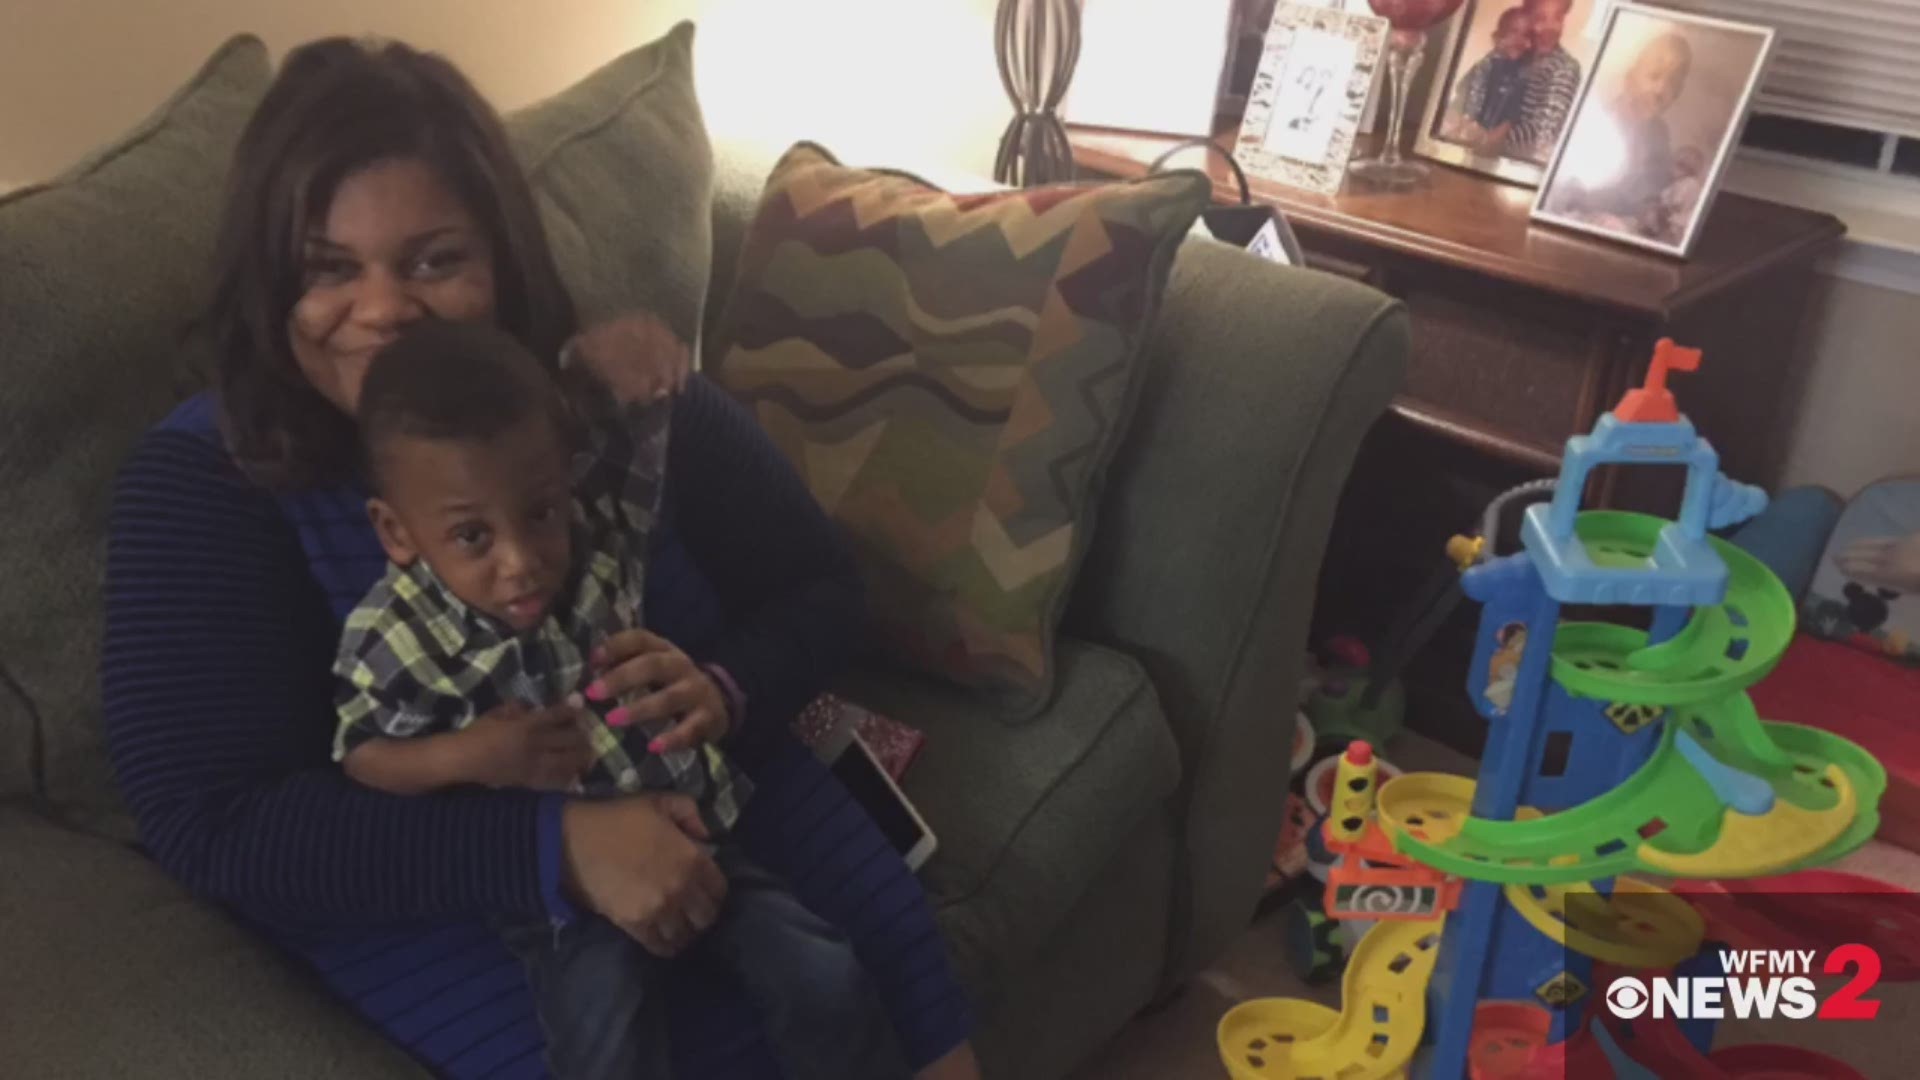 Rodericka Moore's son Amari was born 4 months early, weighed only 15 ounces and was the size of a smartphone. But now, he's turning 2 and doing great!